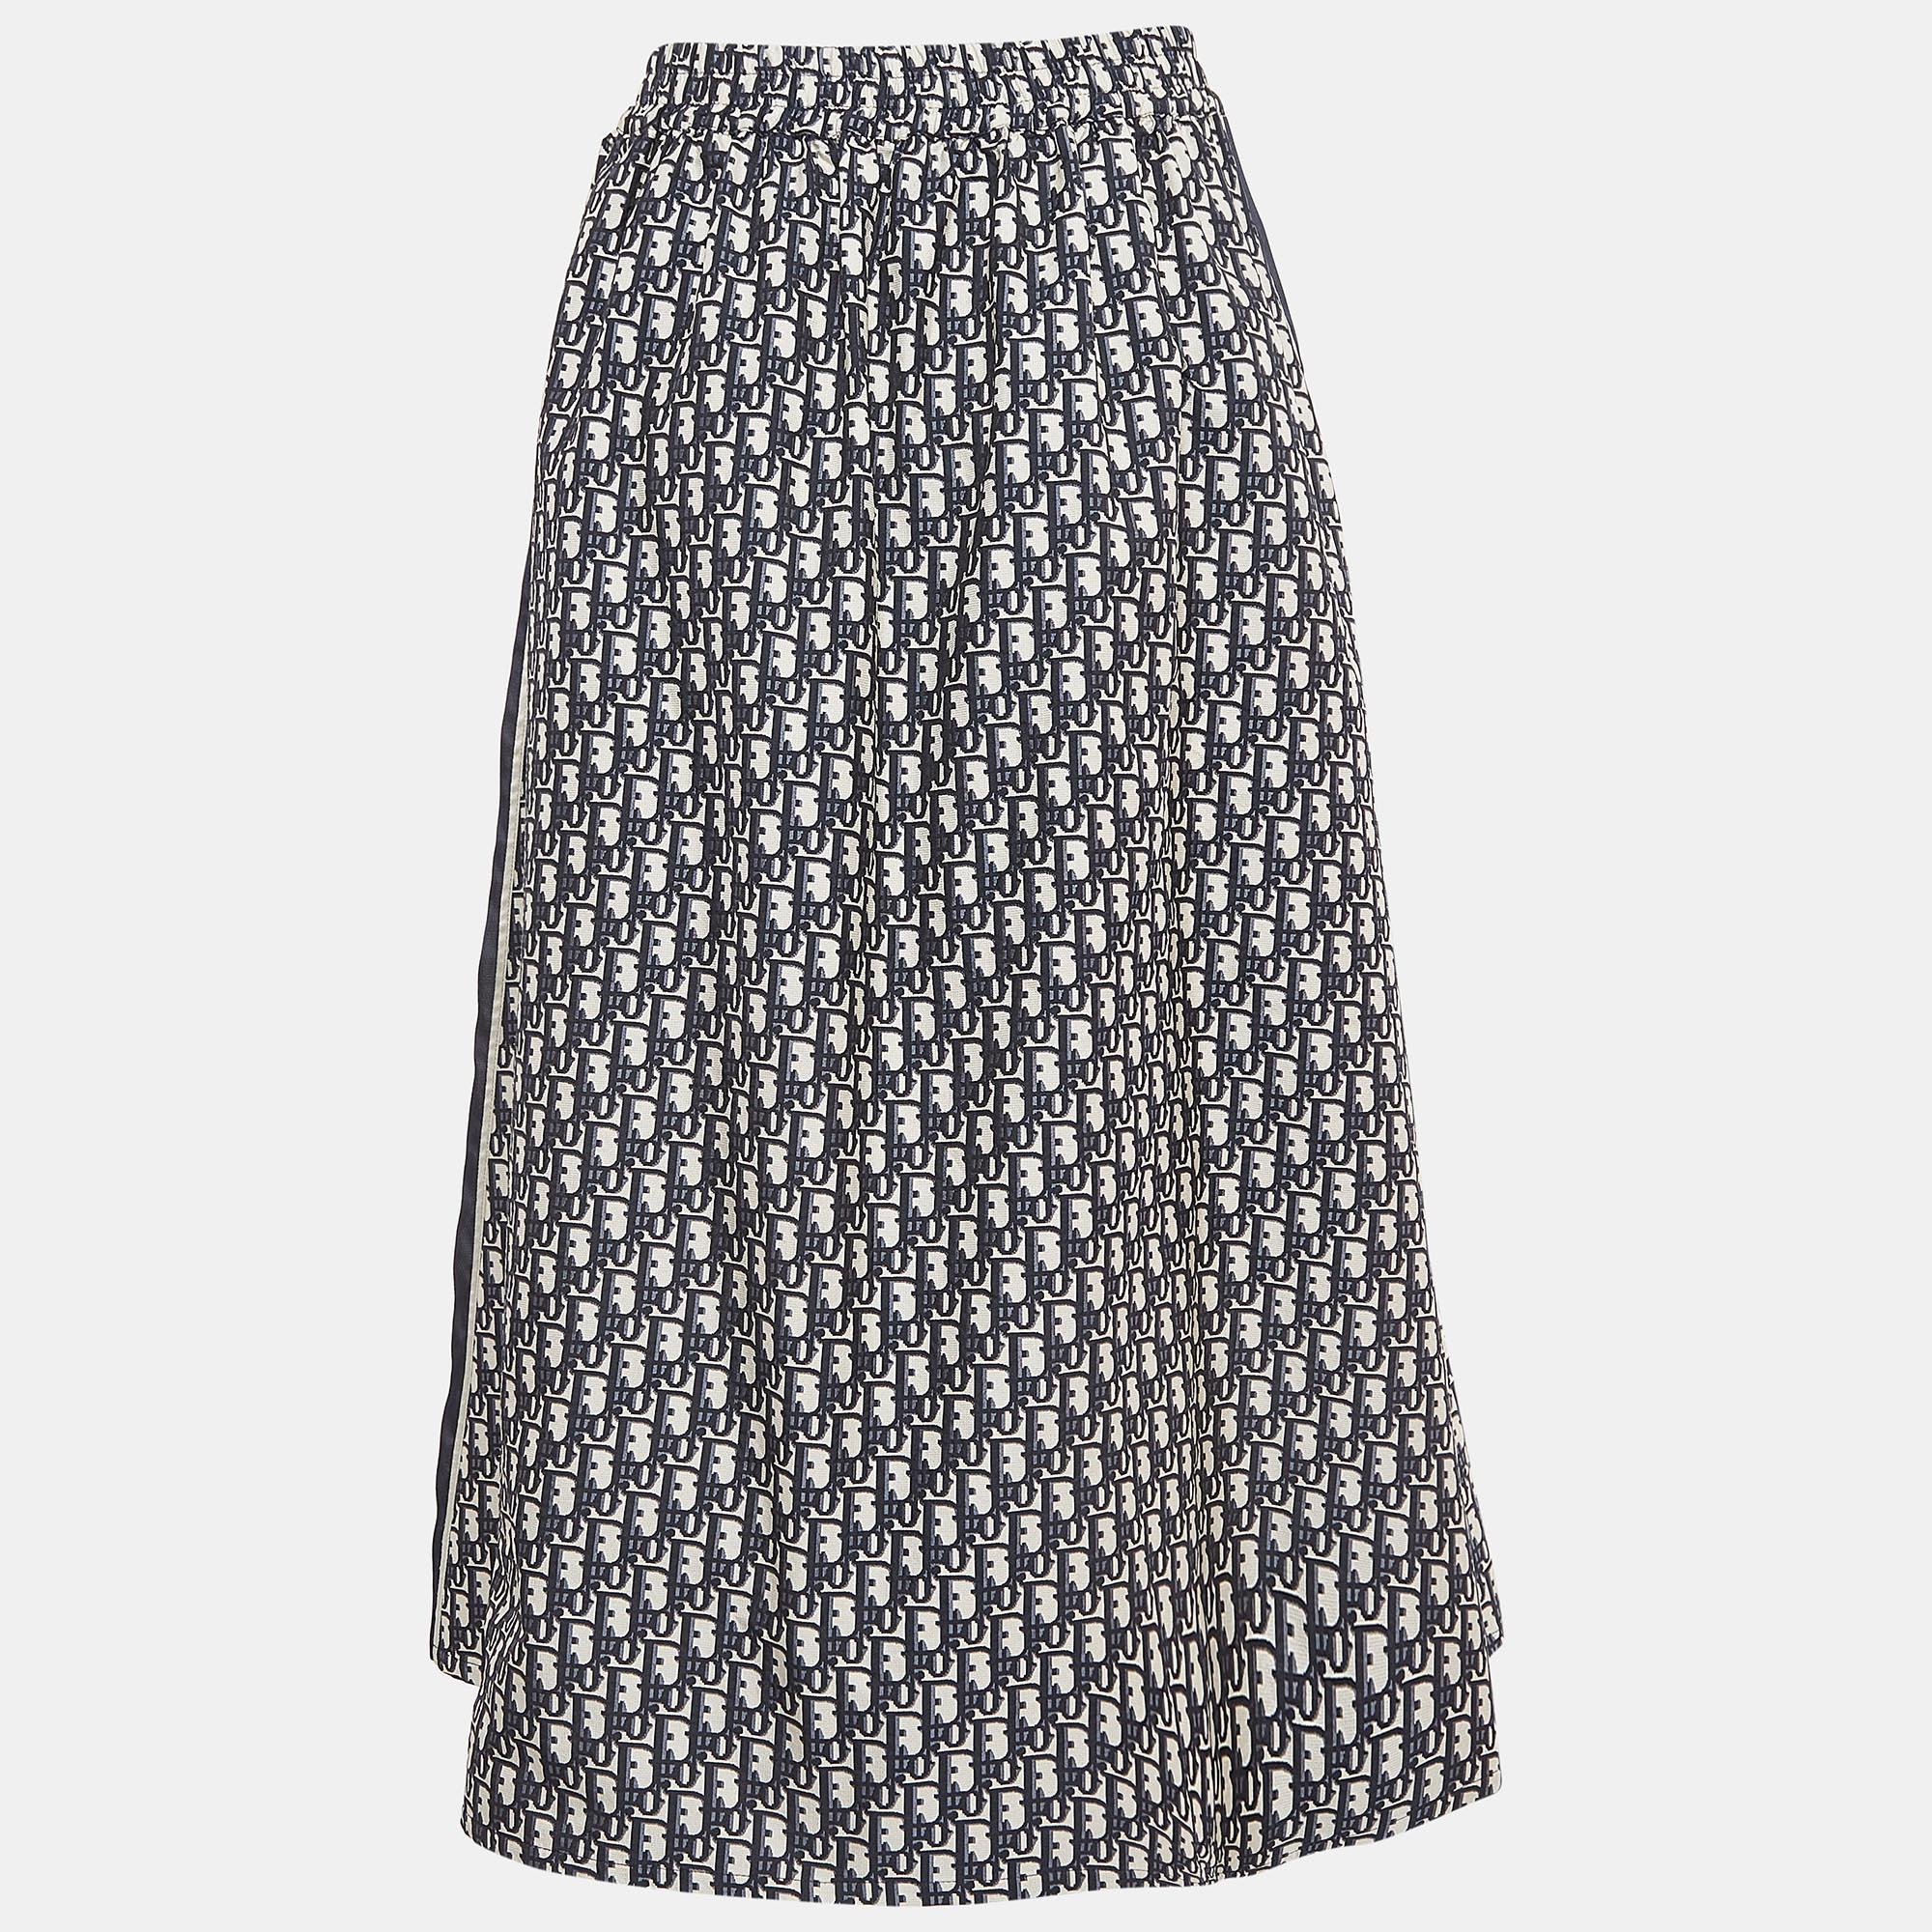 This elegant skirt is worth adding to your closet! Crafted from fine materials, it is exquisitely designed into a flattering shape.

